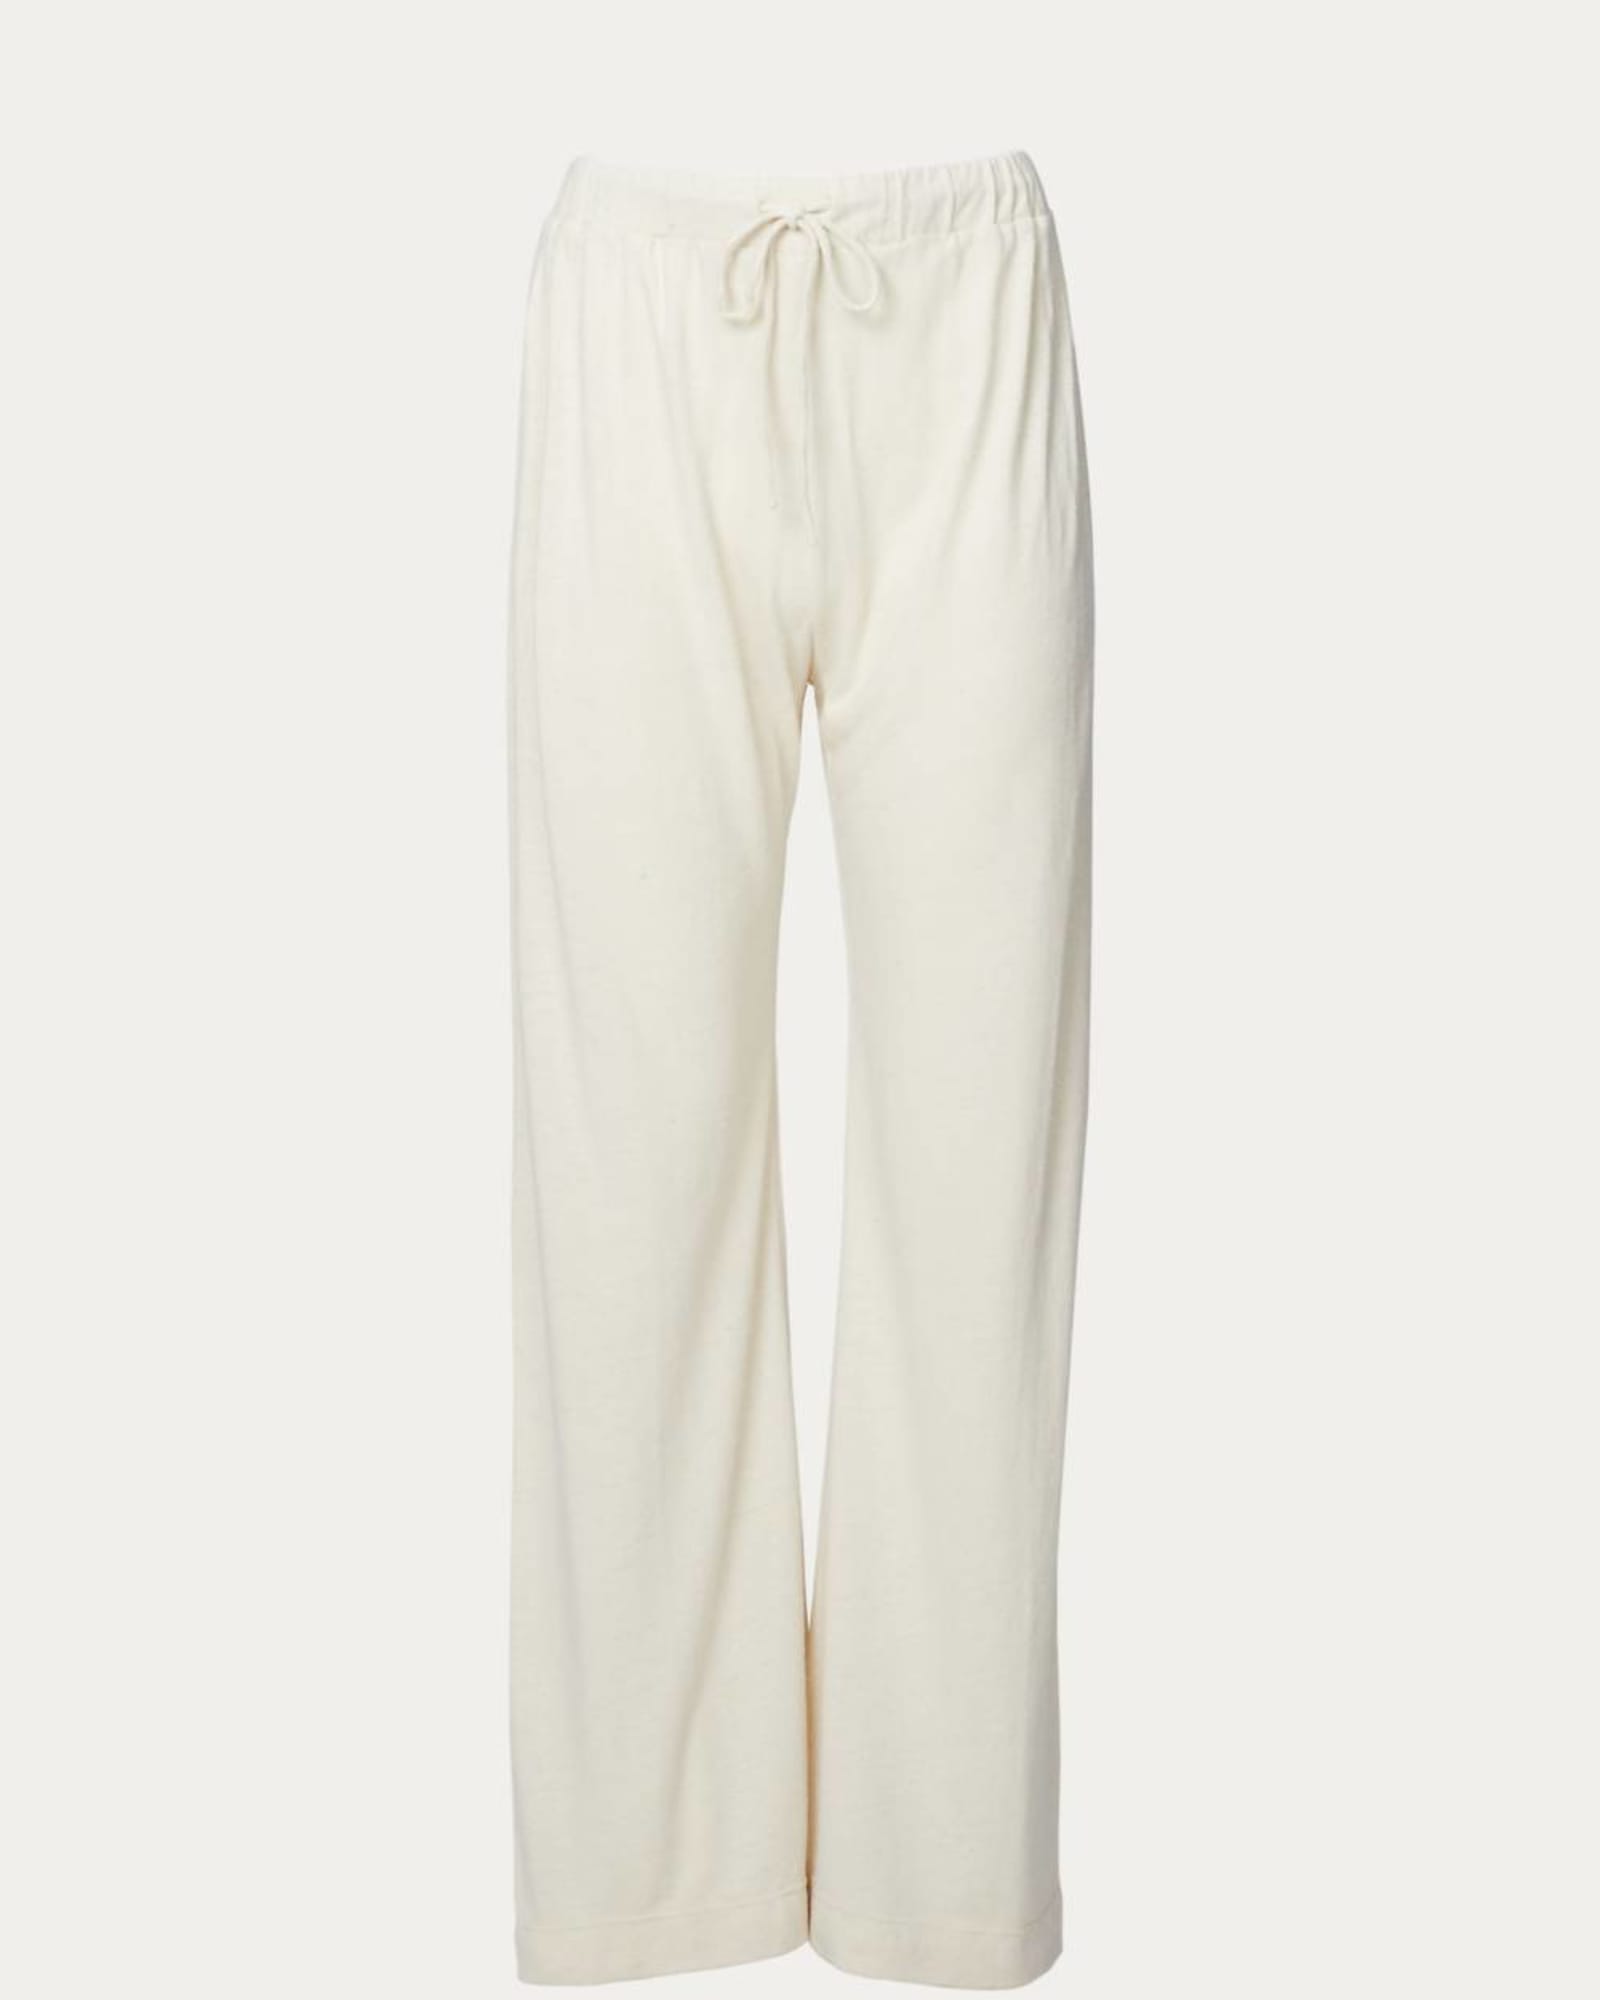 The Maelle Pants in Ivory | Ivory